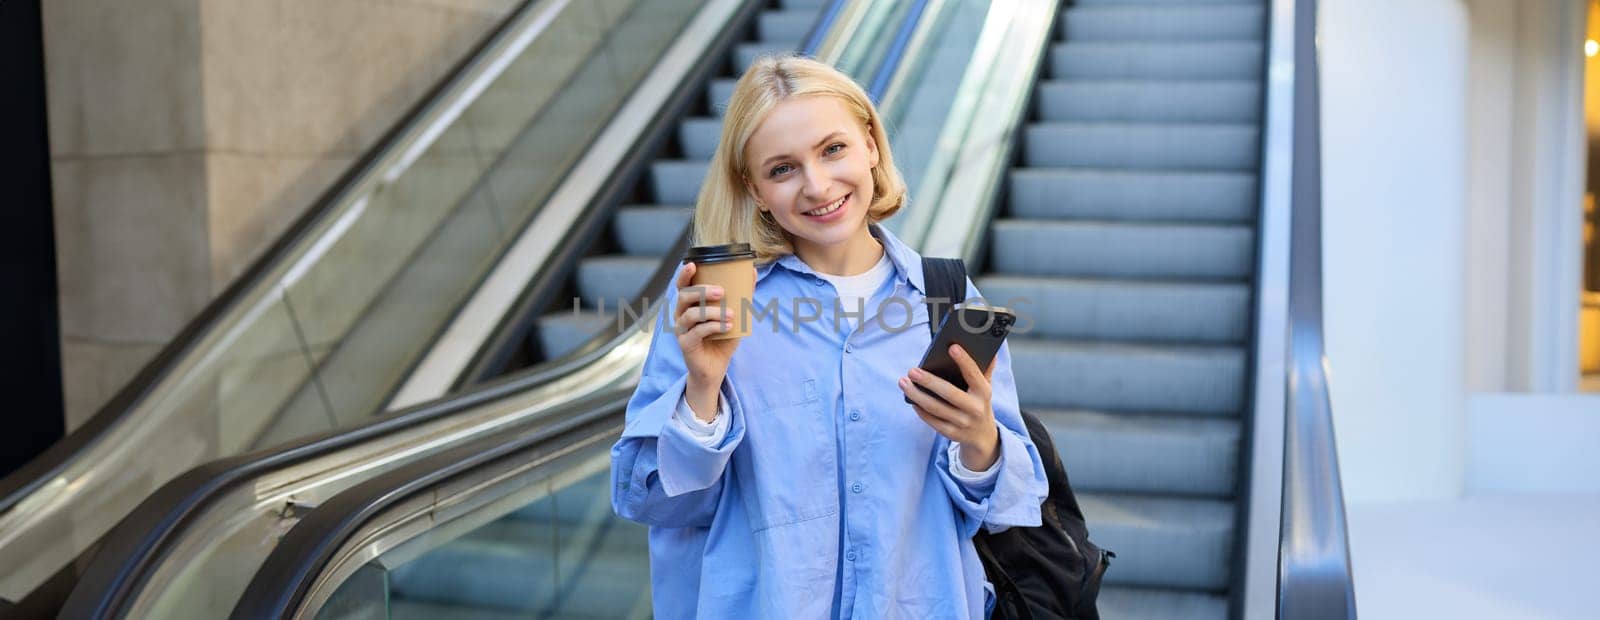 Image of beautiful female model, student standing near escalator, raising cup of takeaway coffee, smiling and looking happy, has mobile phone in hand and backpack on shoulder.